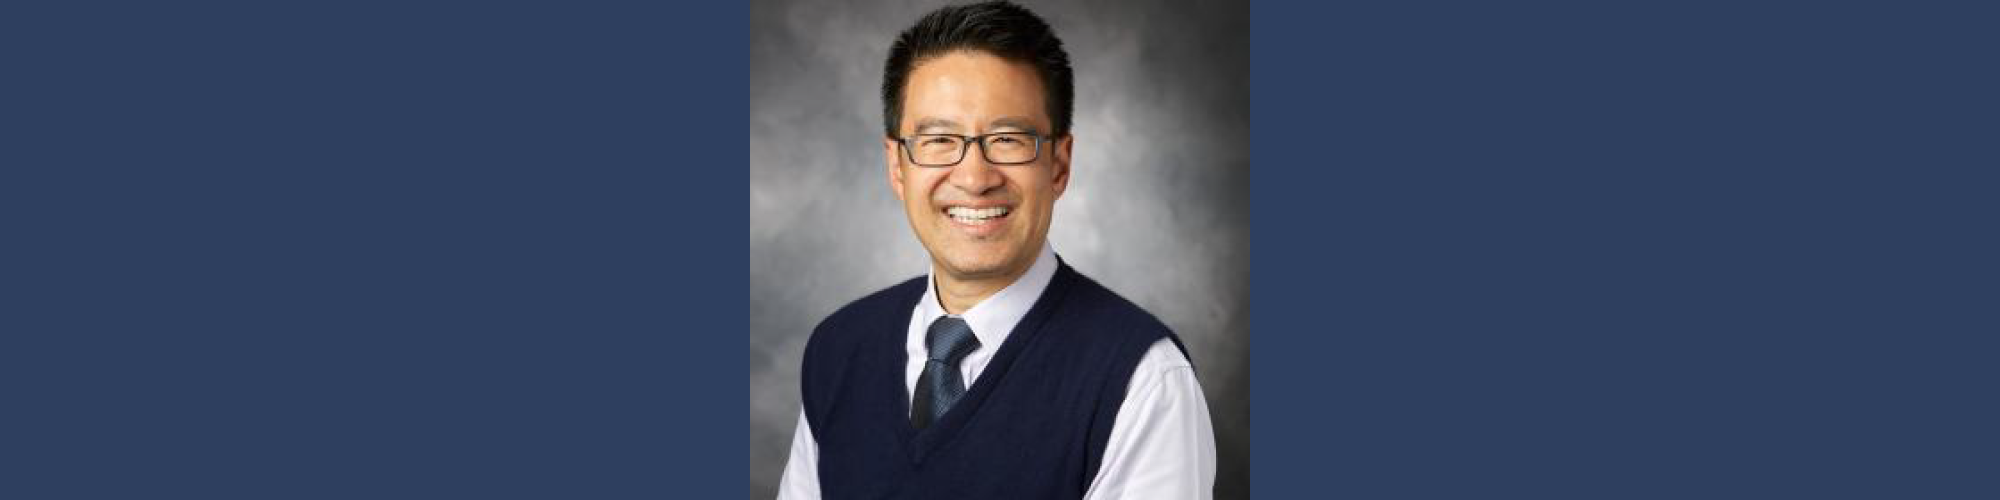 St. Anthony Foundation Appoints Lawrence Kwan, MD as New Chief Medical Officer